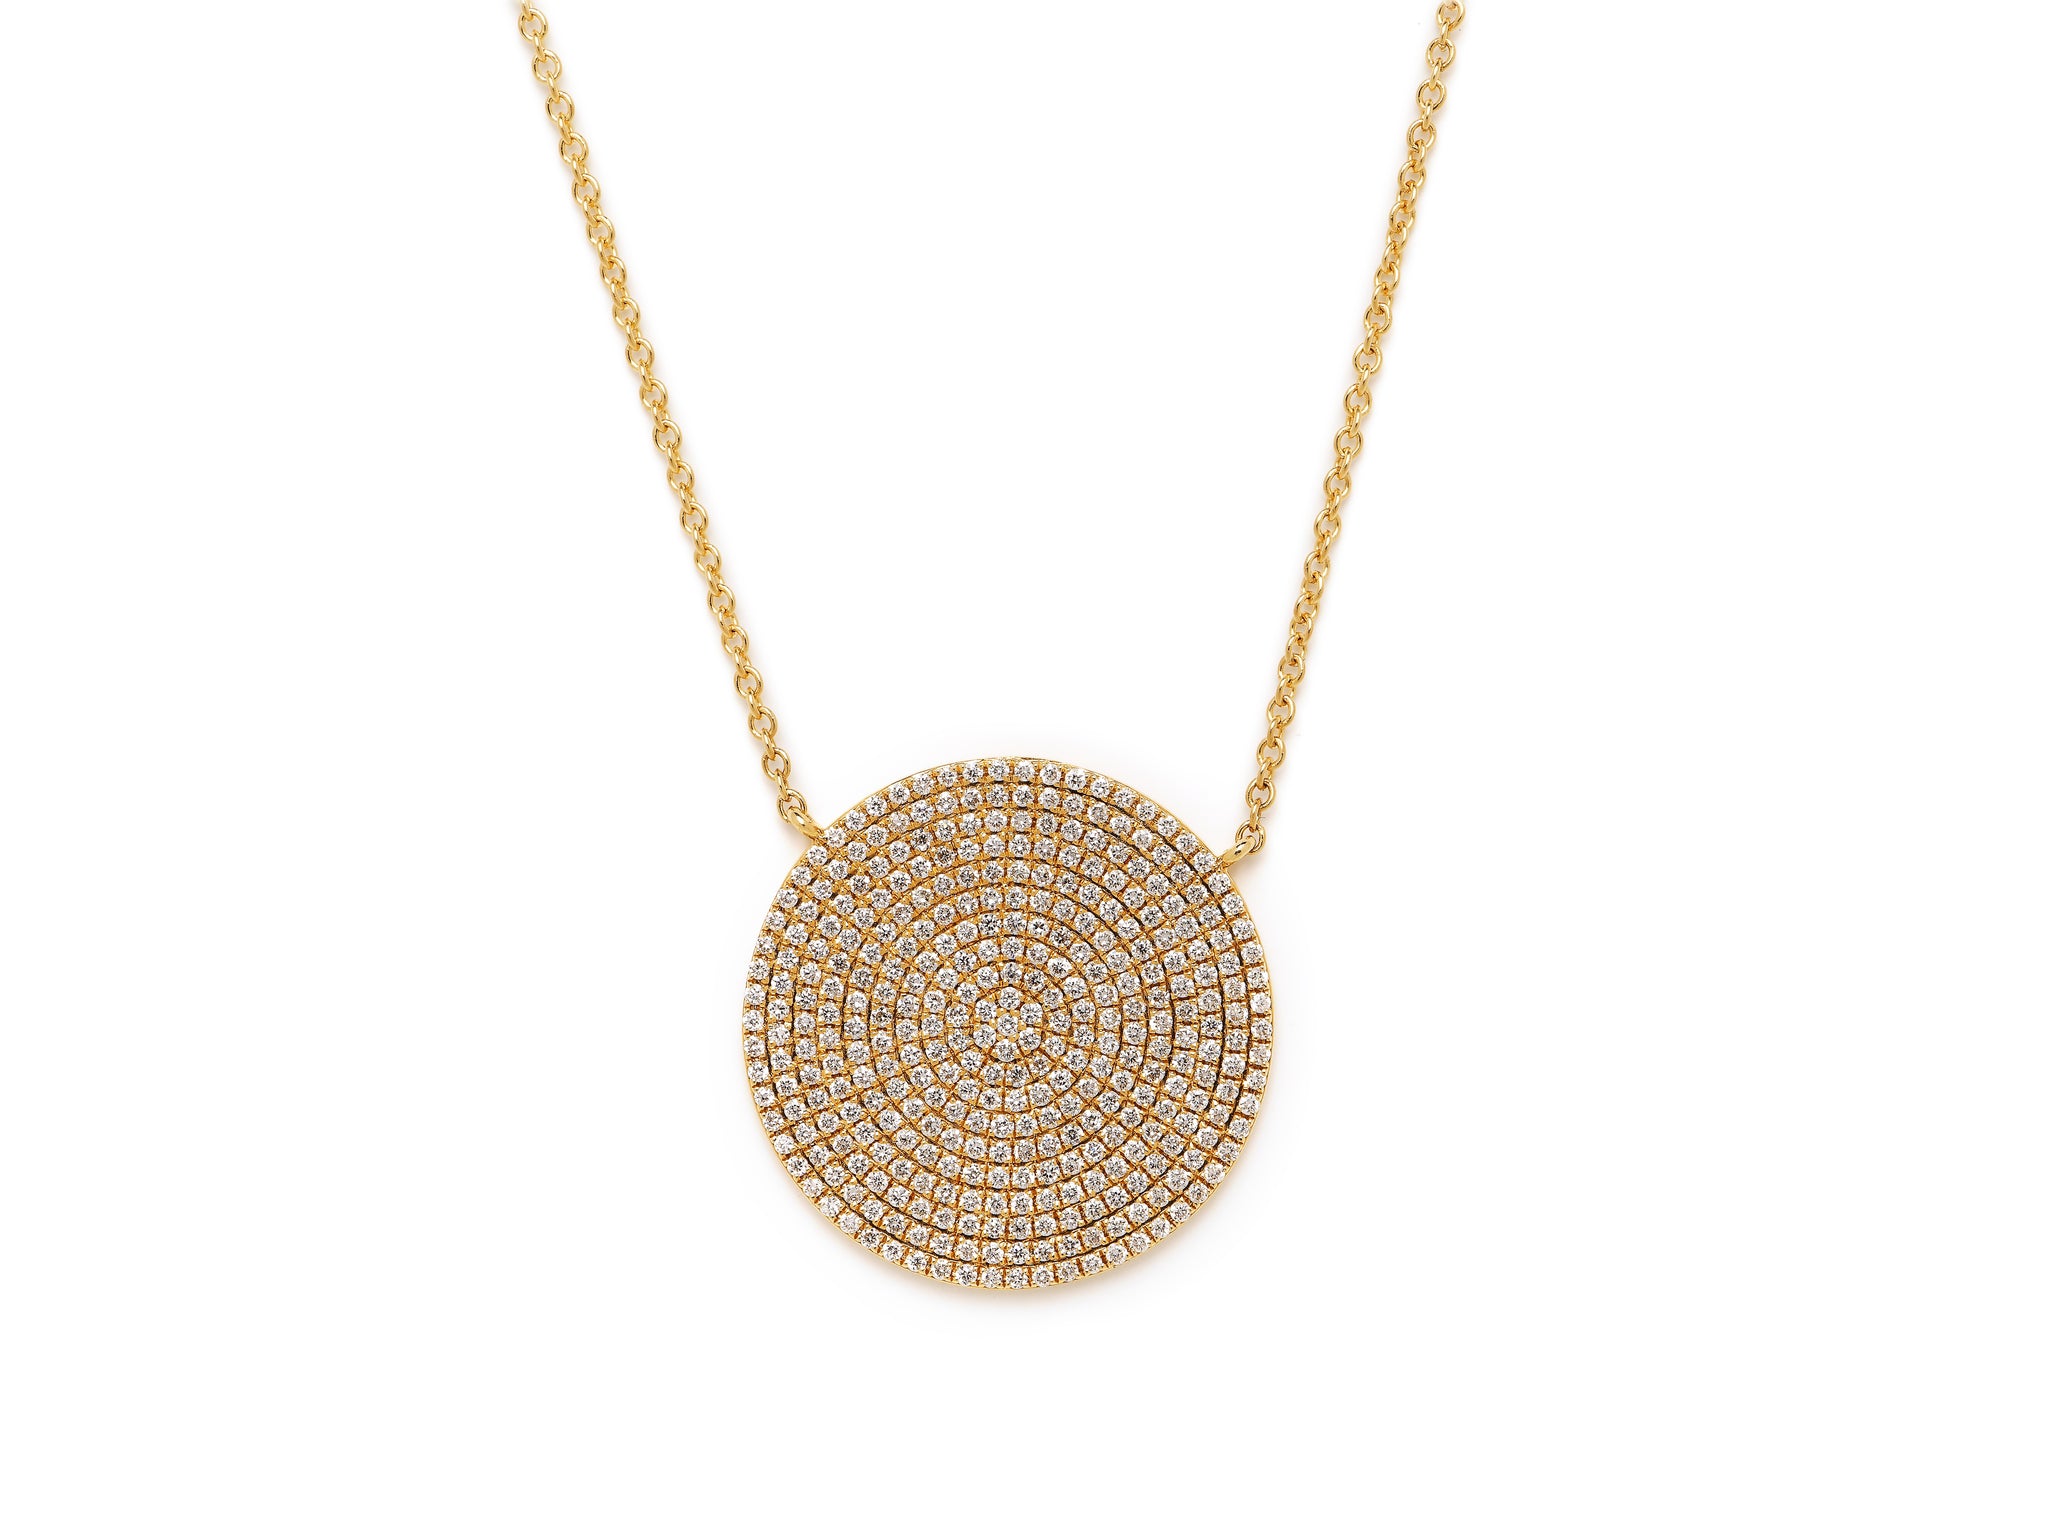 18 krt yellow gold necklace set with 347 brilliant diamonds (20 mm)